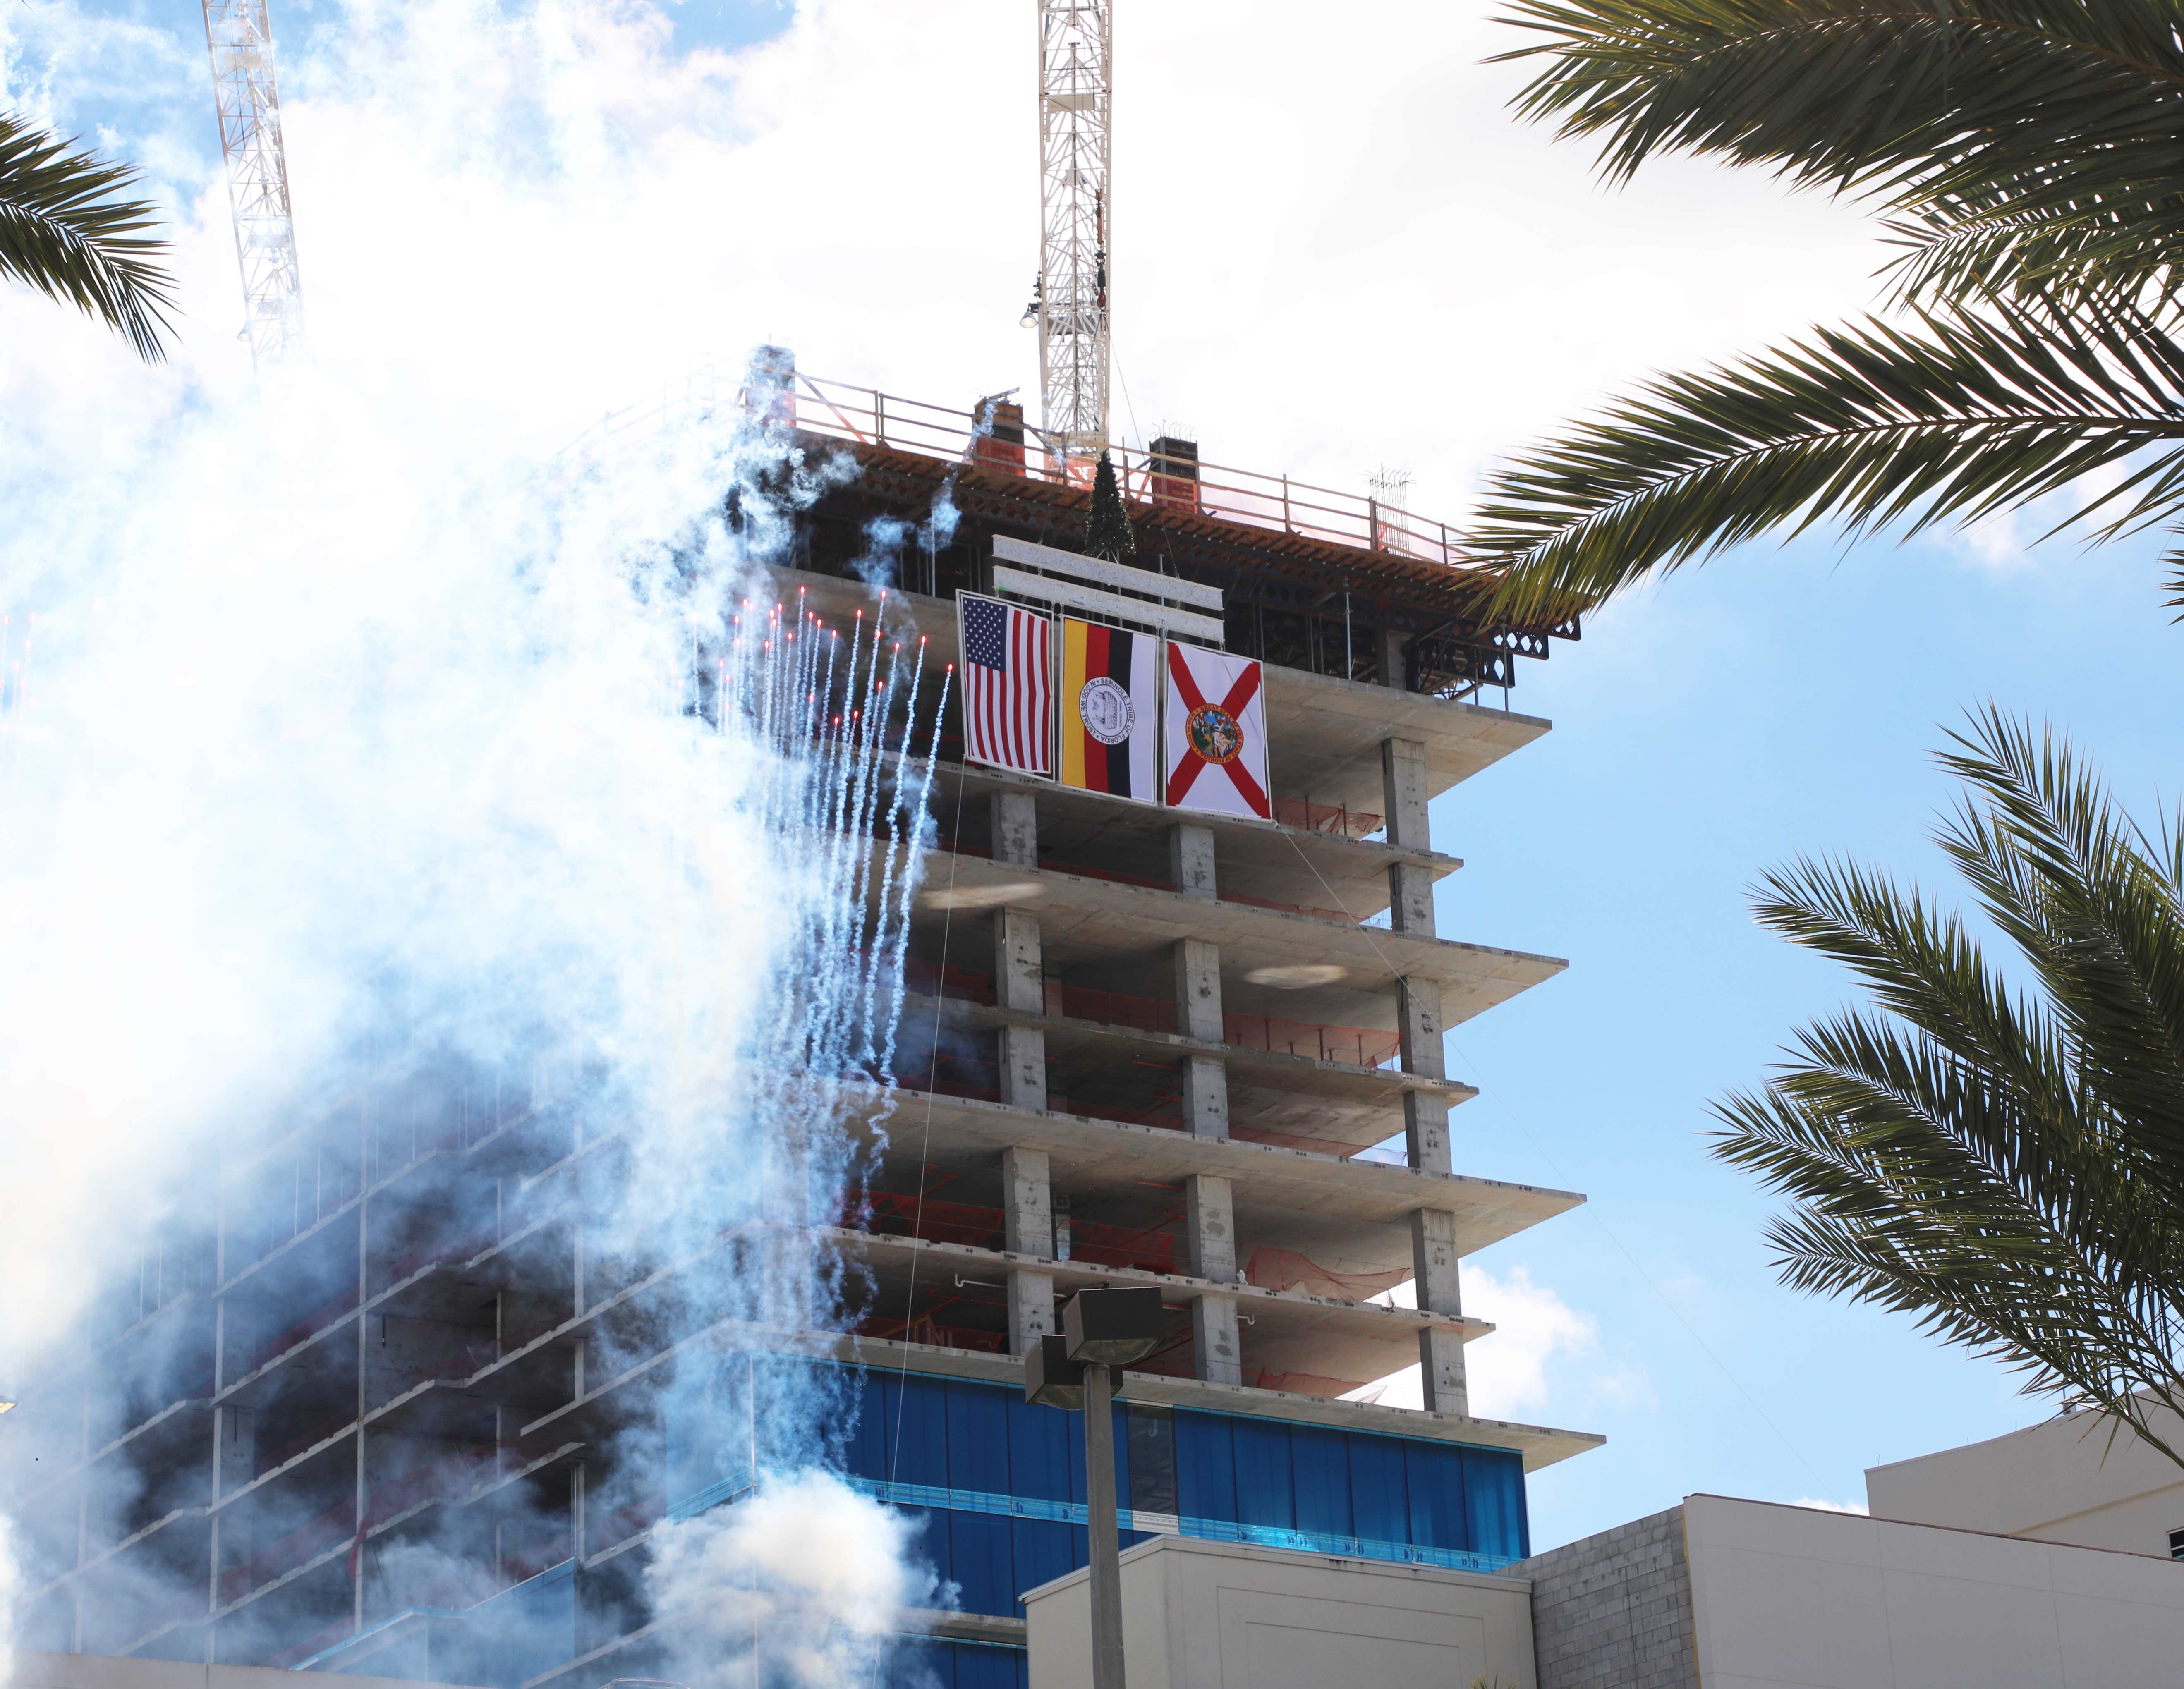 Yates Construction Tops-Out the Tampa Hard Rock Hotel and Casino Expansion Project